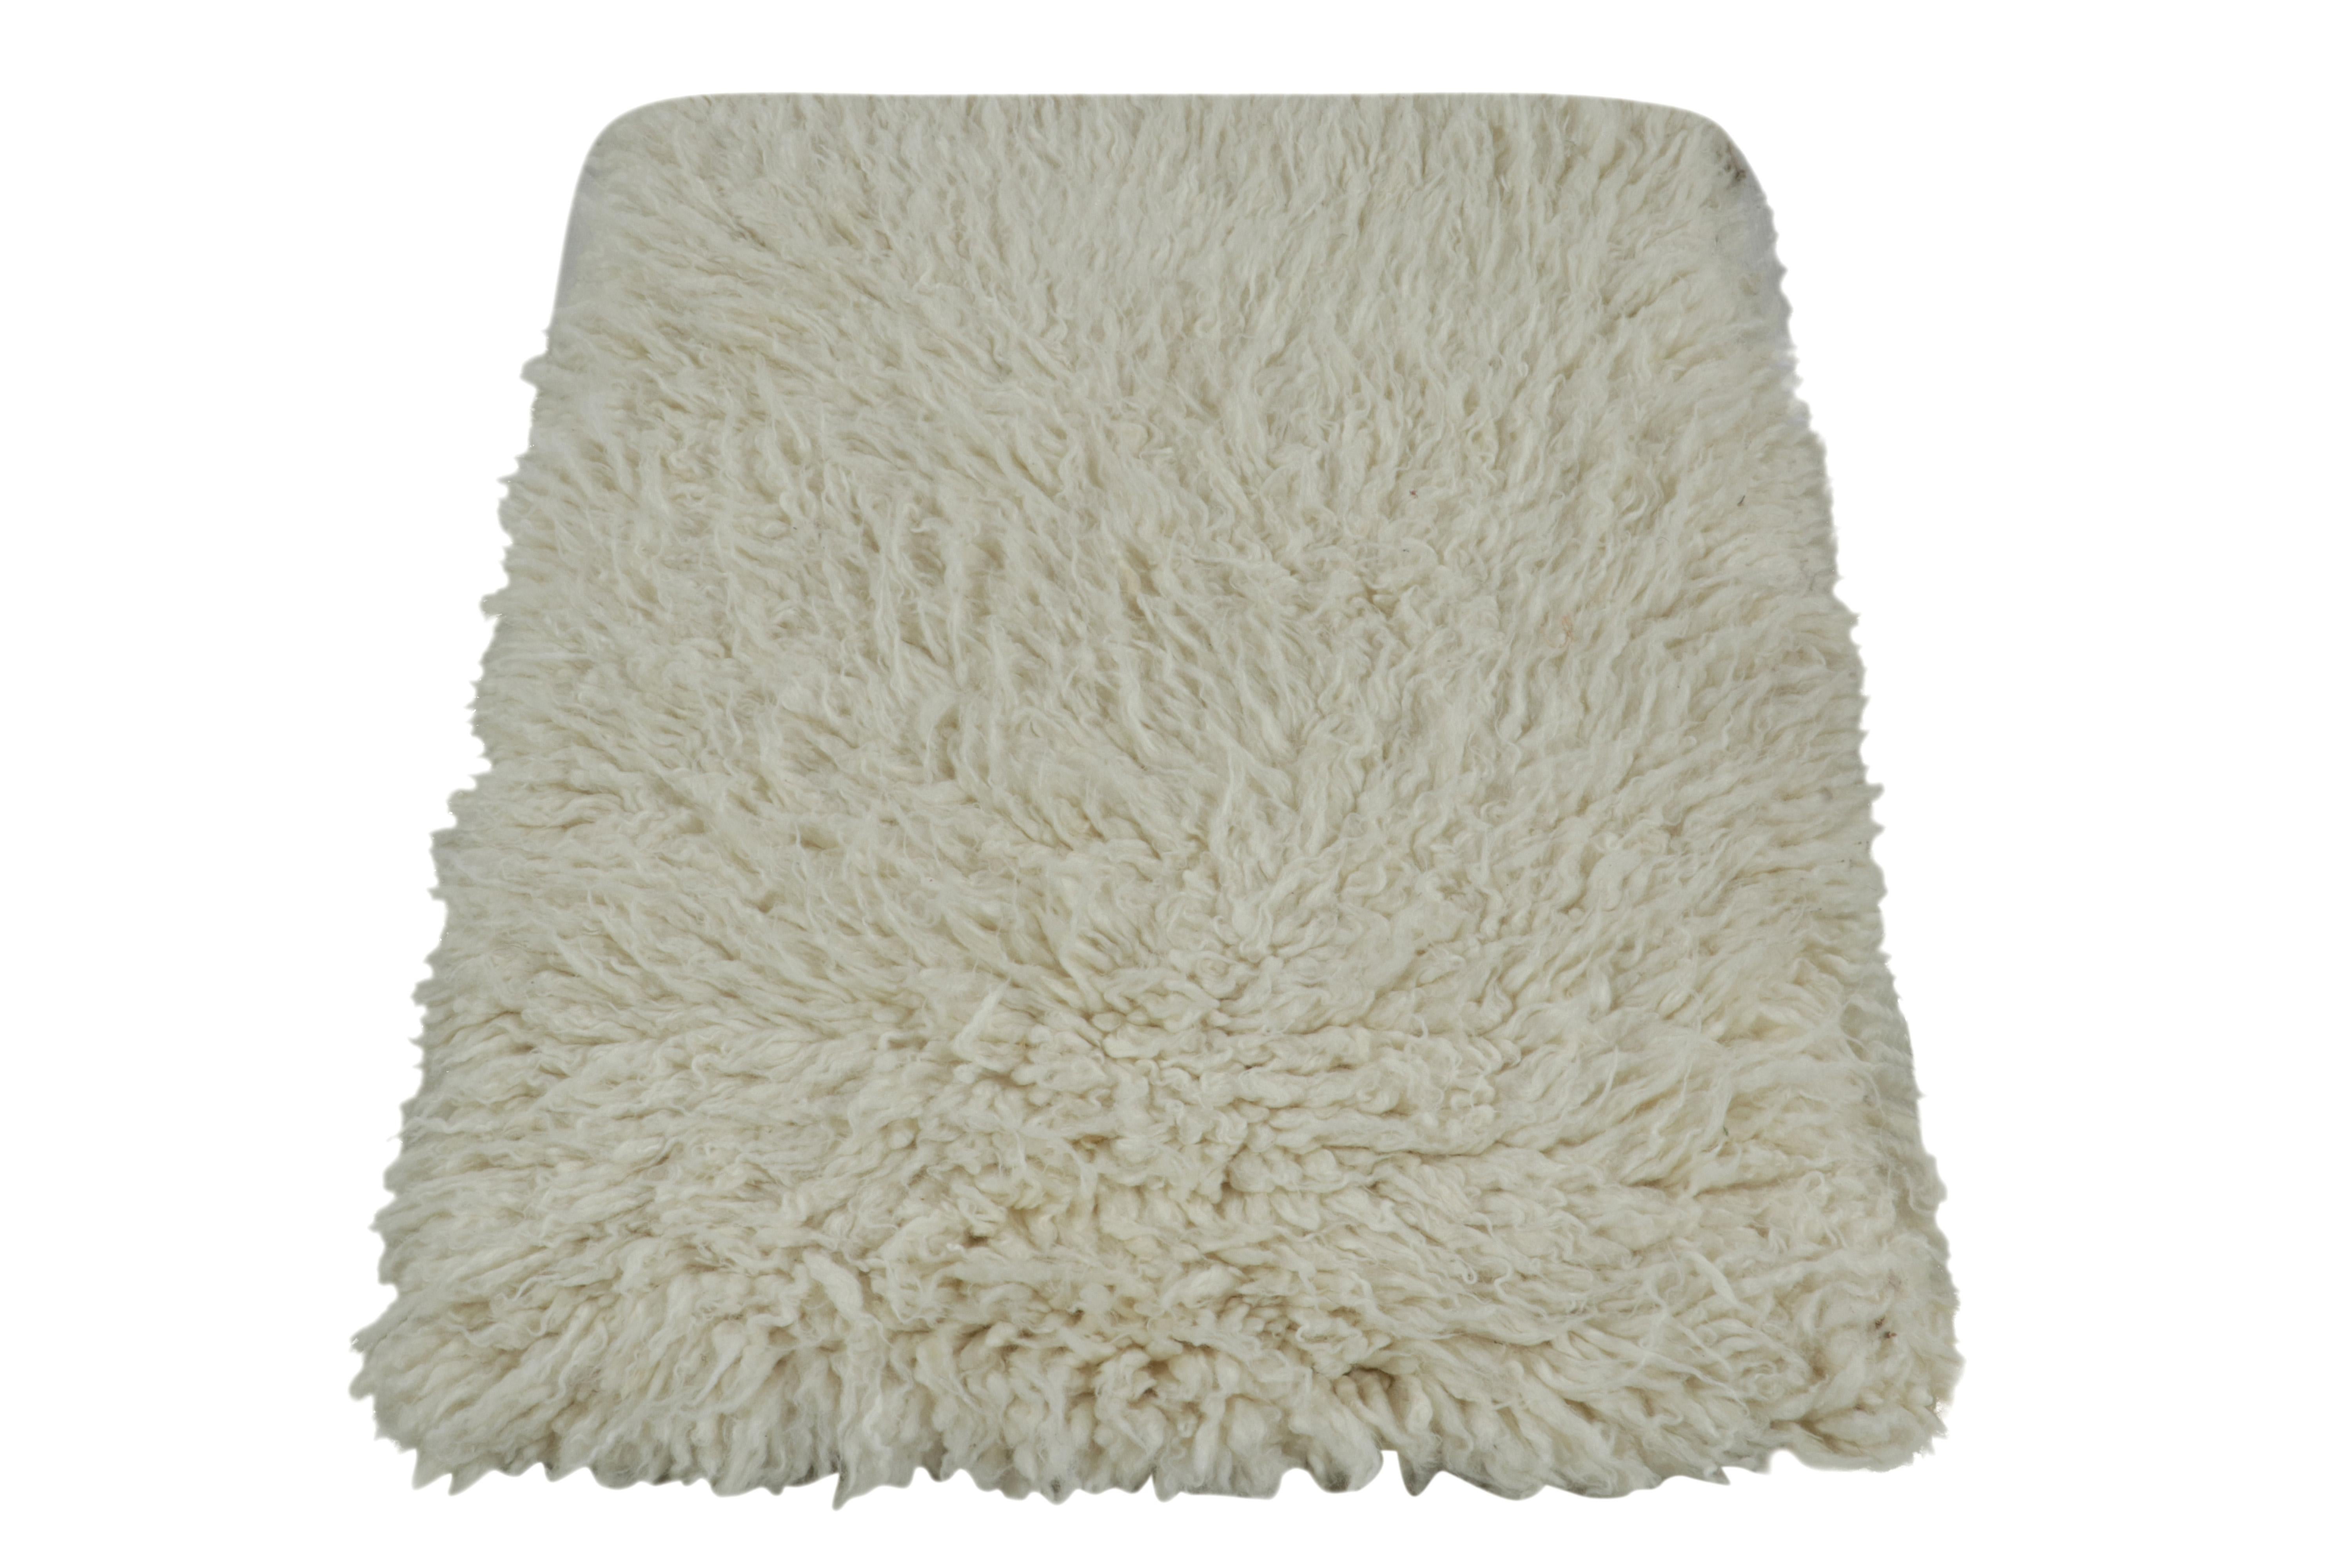 Hand-knotted in wool, a 2x3 solid rug marking Rug & Kilim’s exclusive contemporary take on Moroccan aesthetics. The rug draws on the coziness and warmth of tribal sensibilities with an off-white shag pile in clean, comforting appeal. Capable of